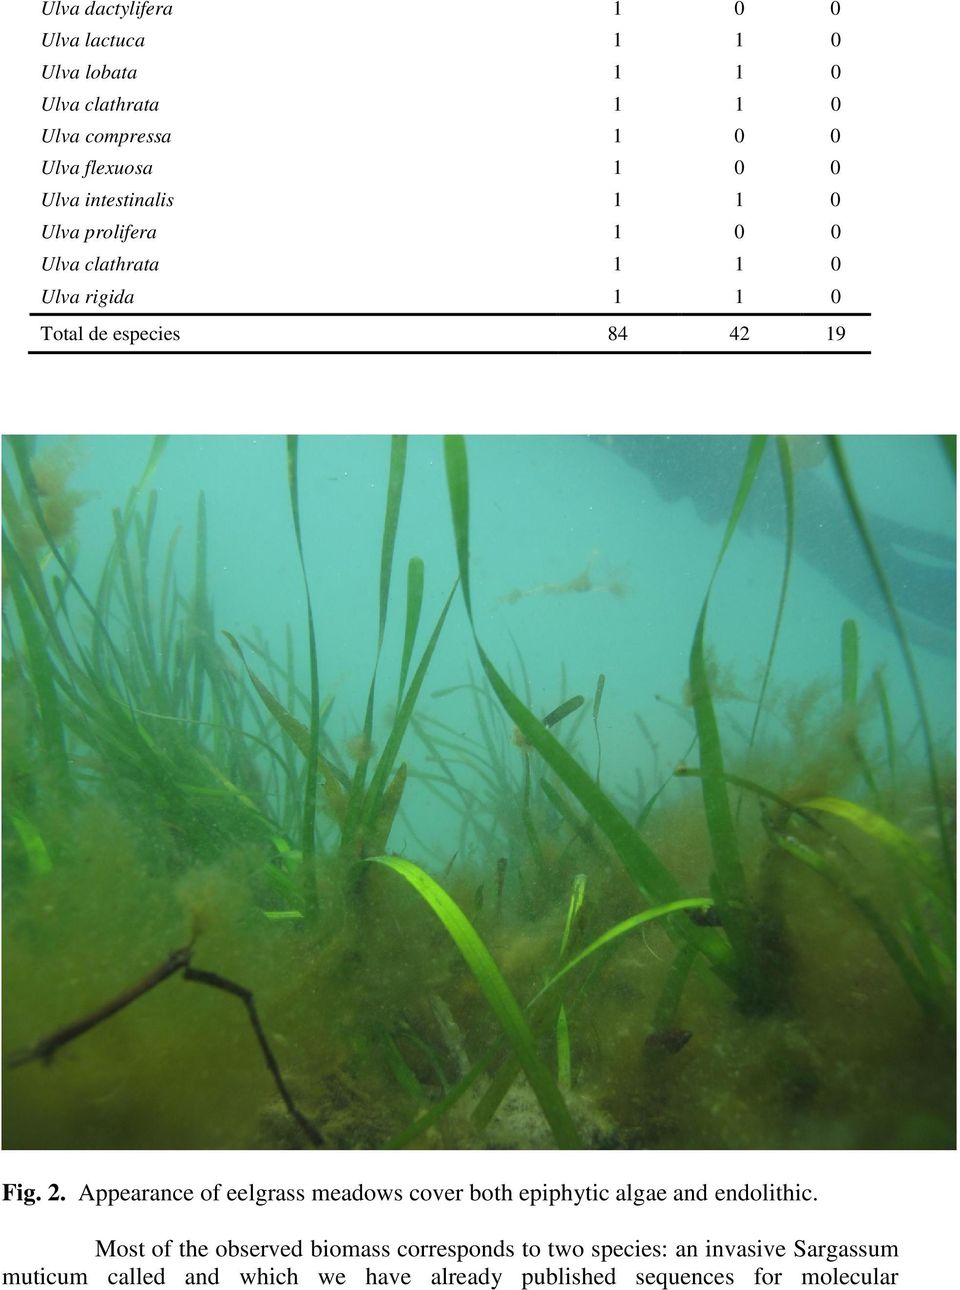 Fig. 2. Appearance of eelgrass meadows cover both epiphytic algae and endolithic.